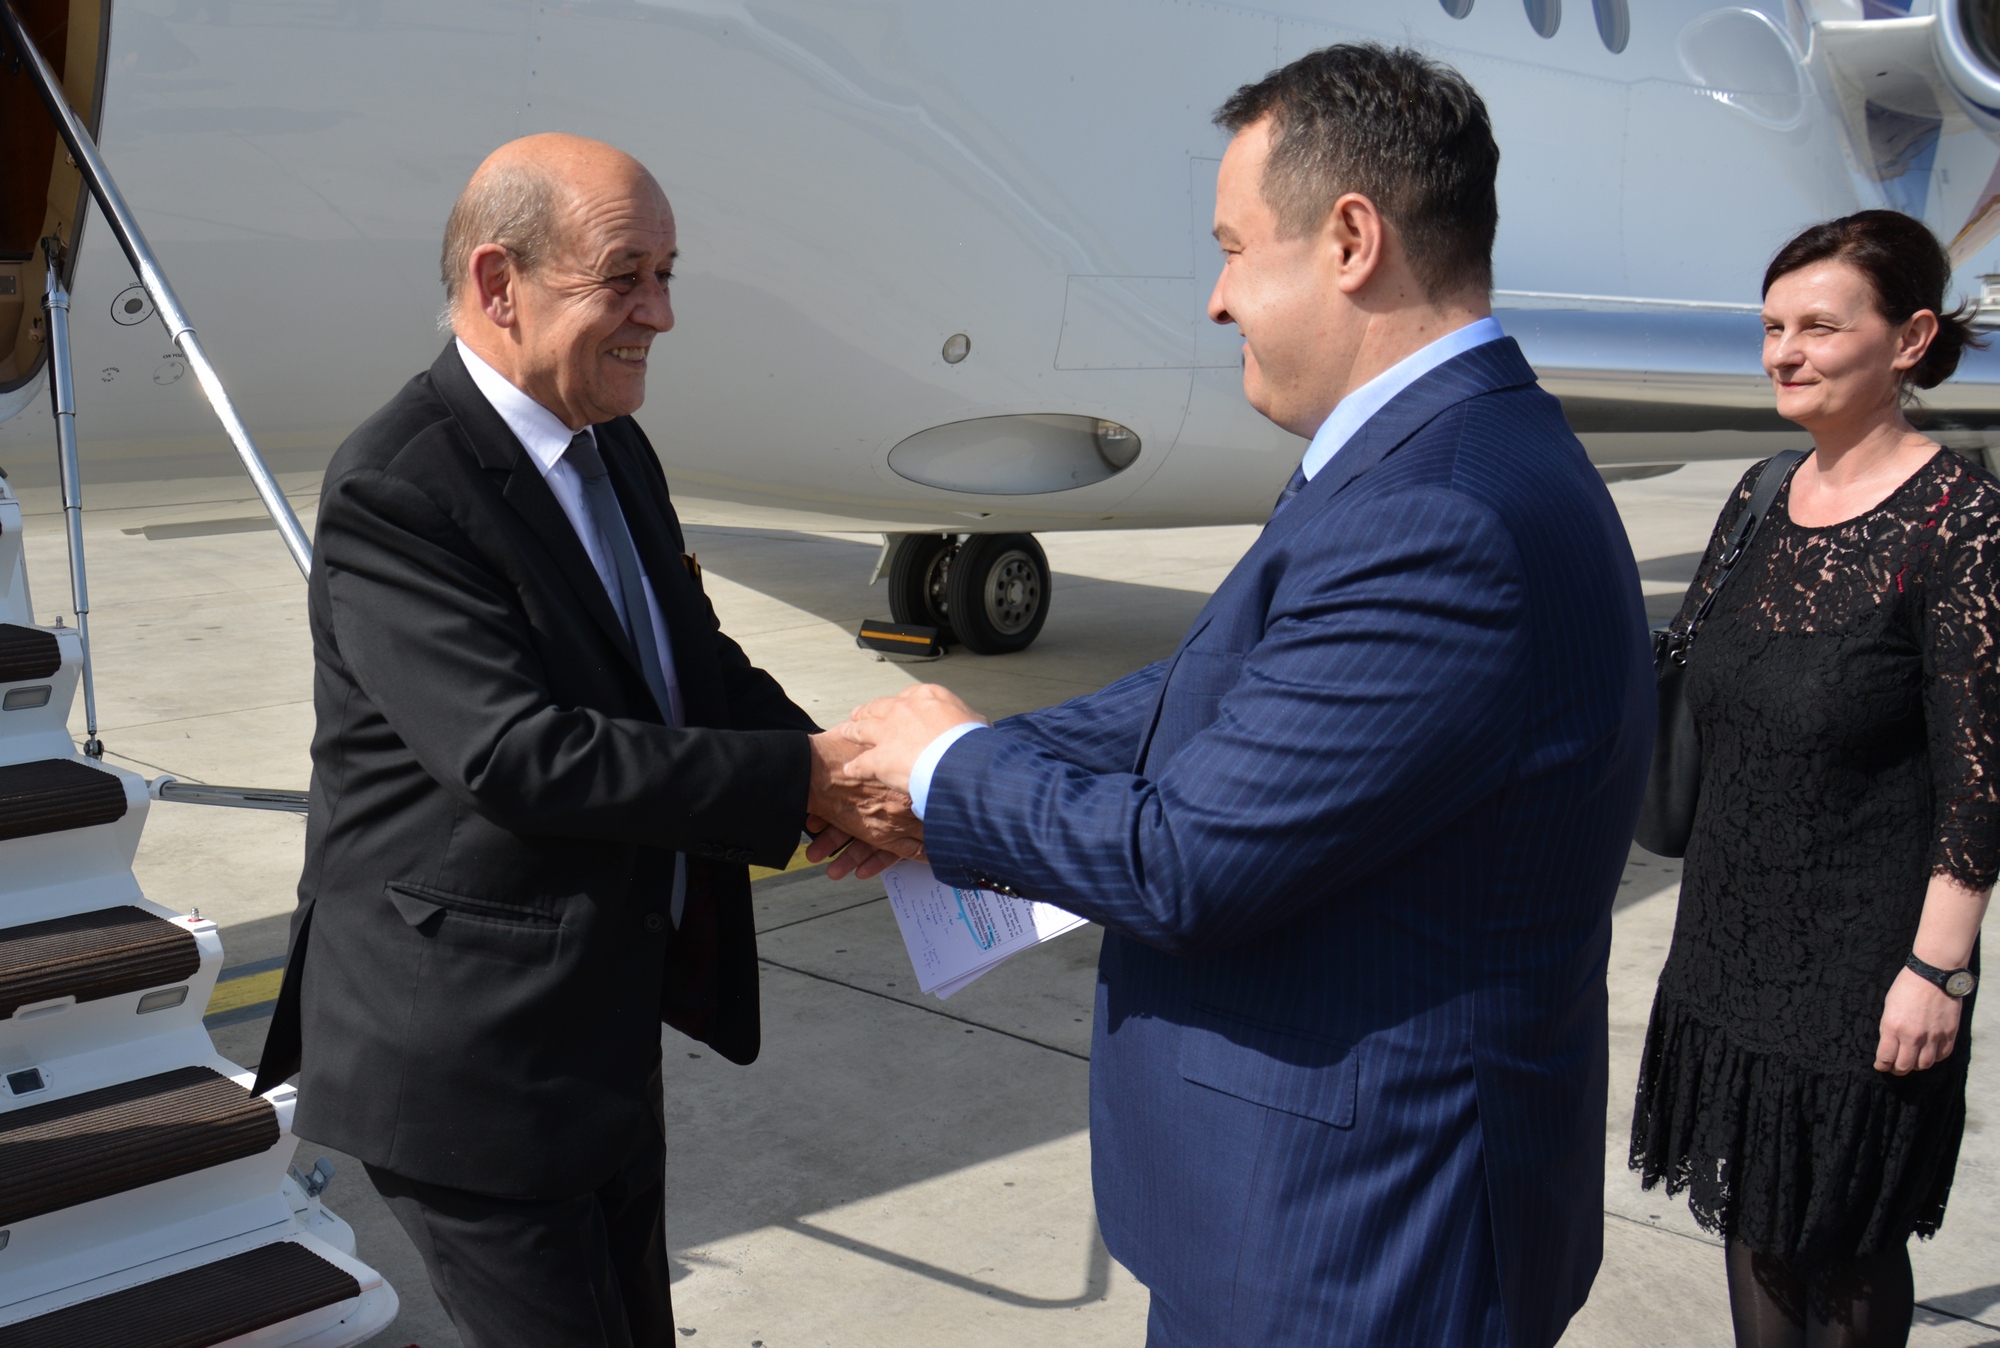 Dacic and Le Drian